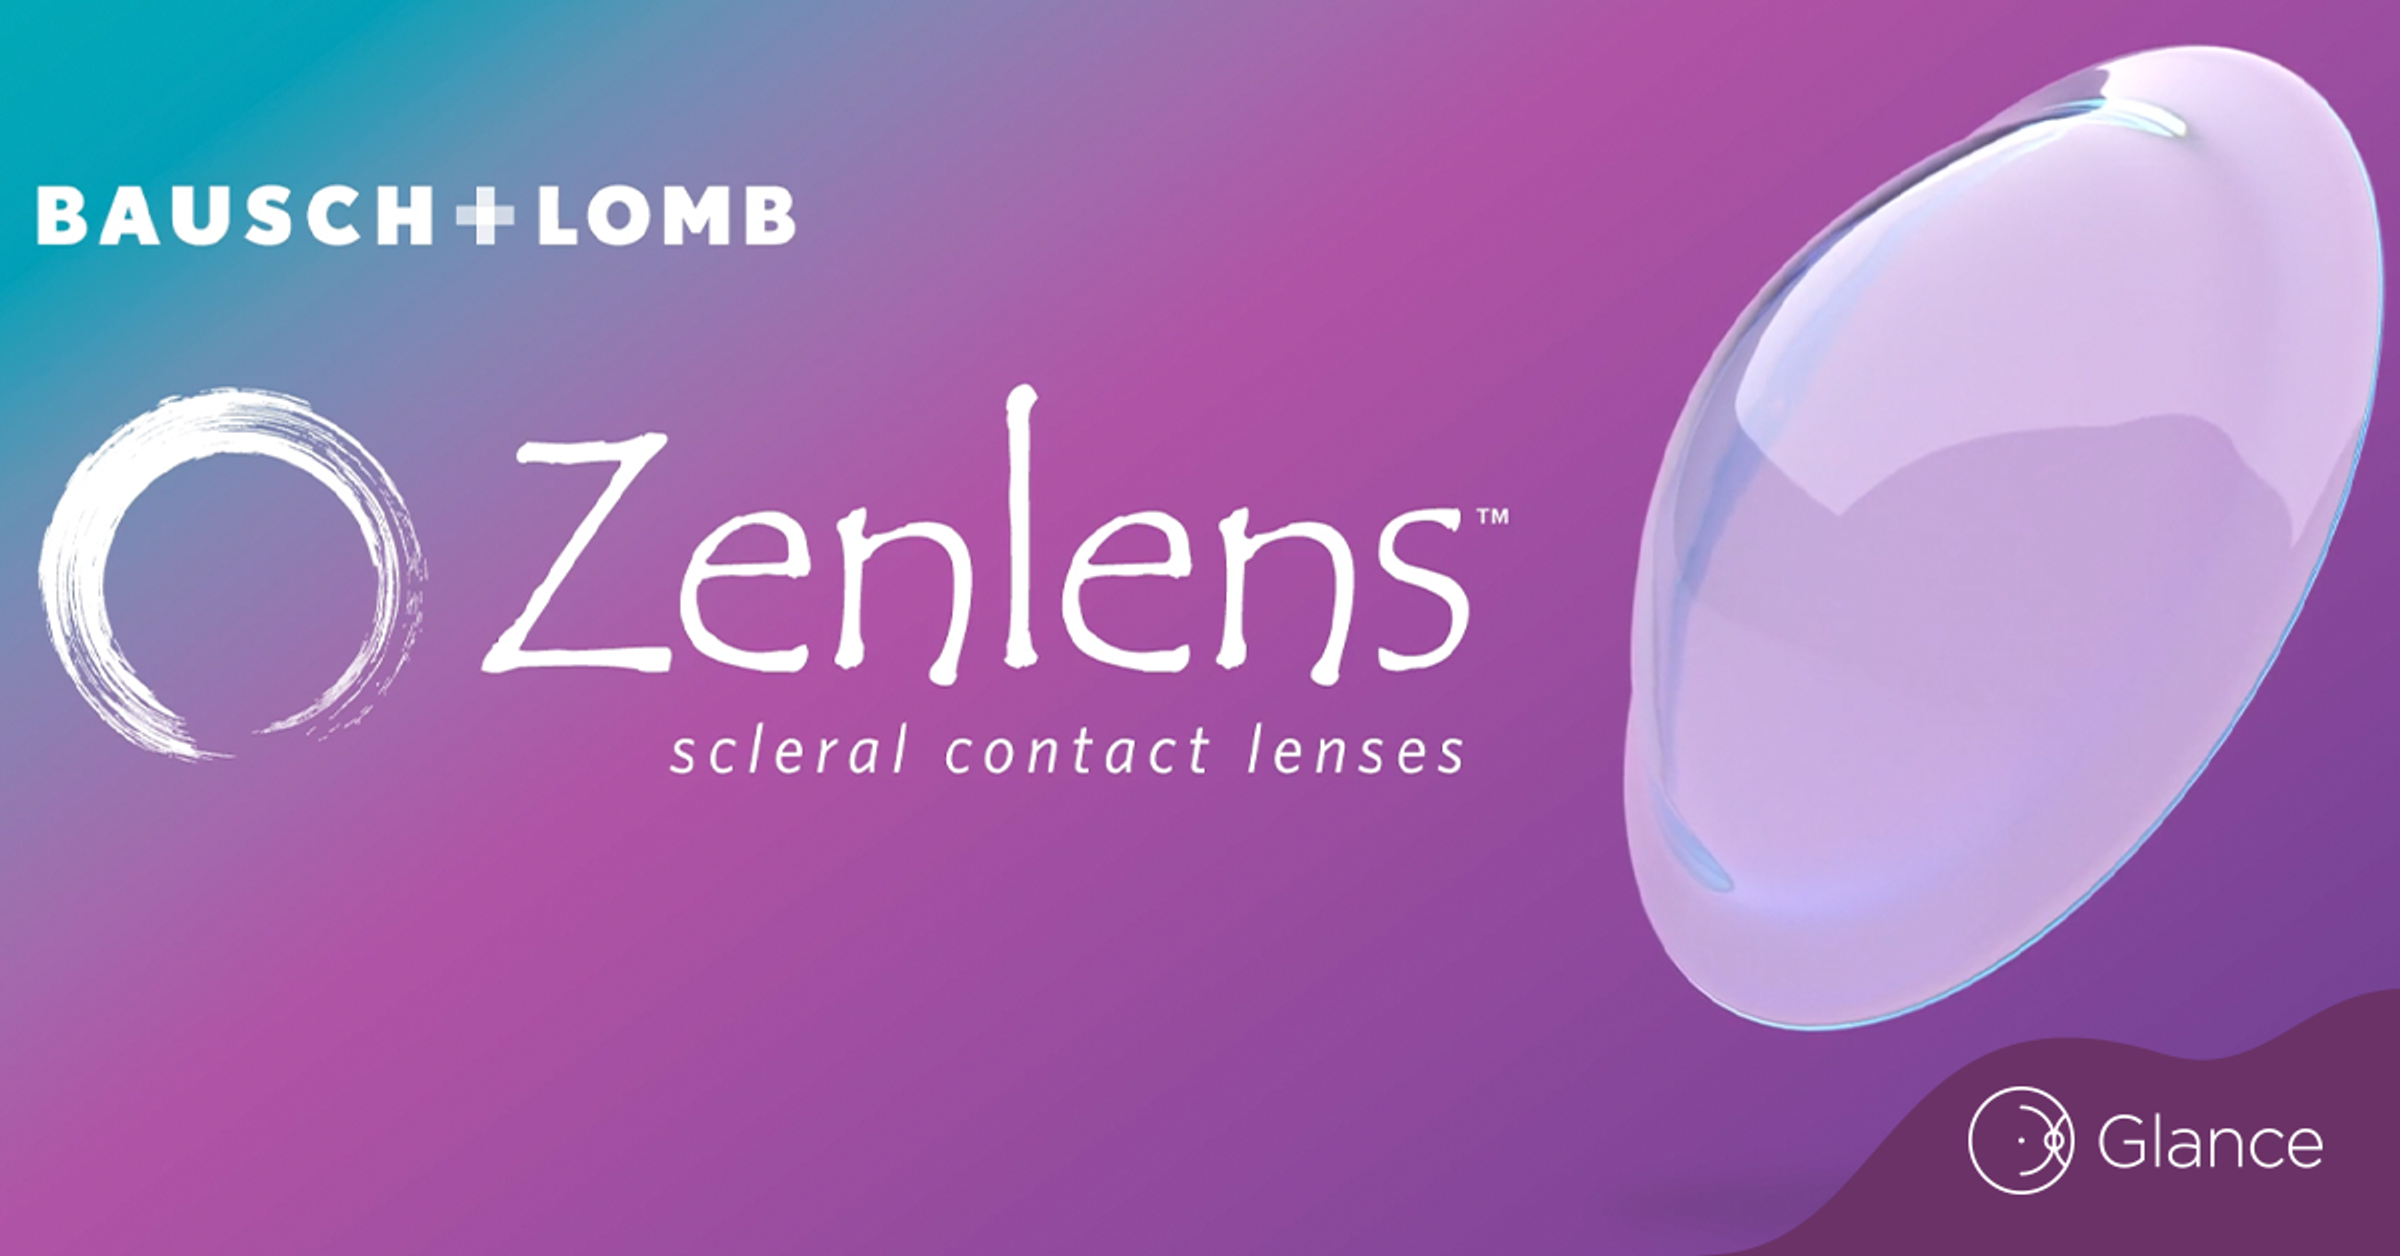 Bausch + Lomb's Zenlens ECHO scleral lens launches in the US